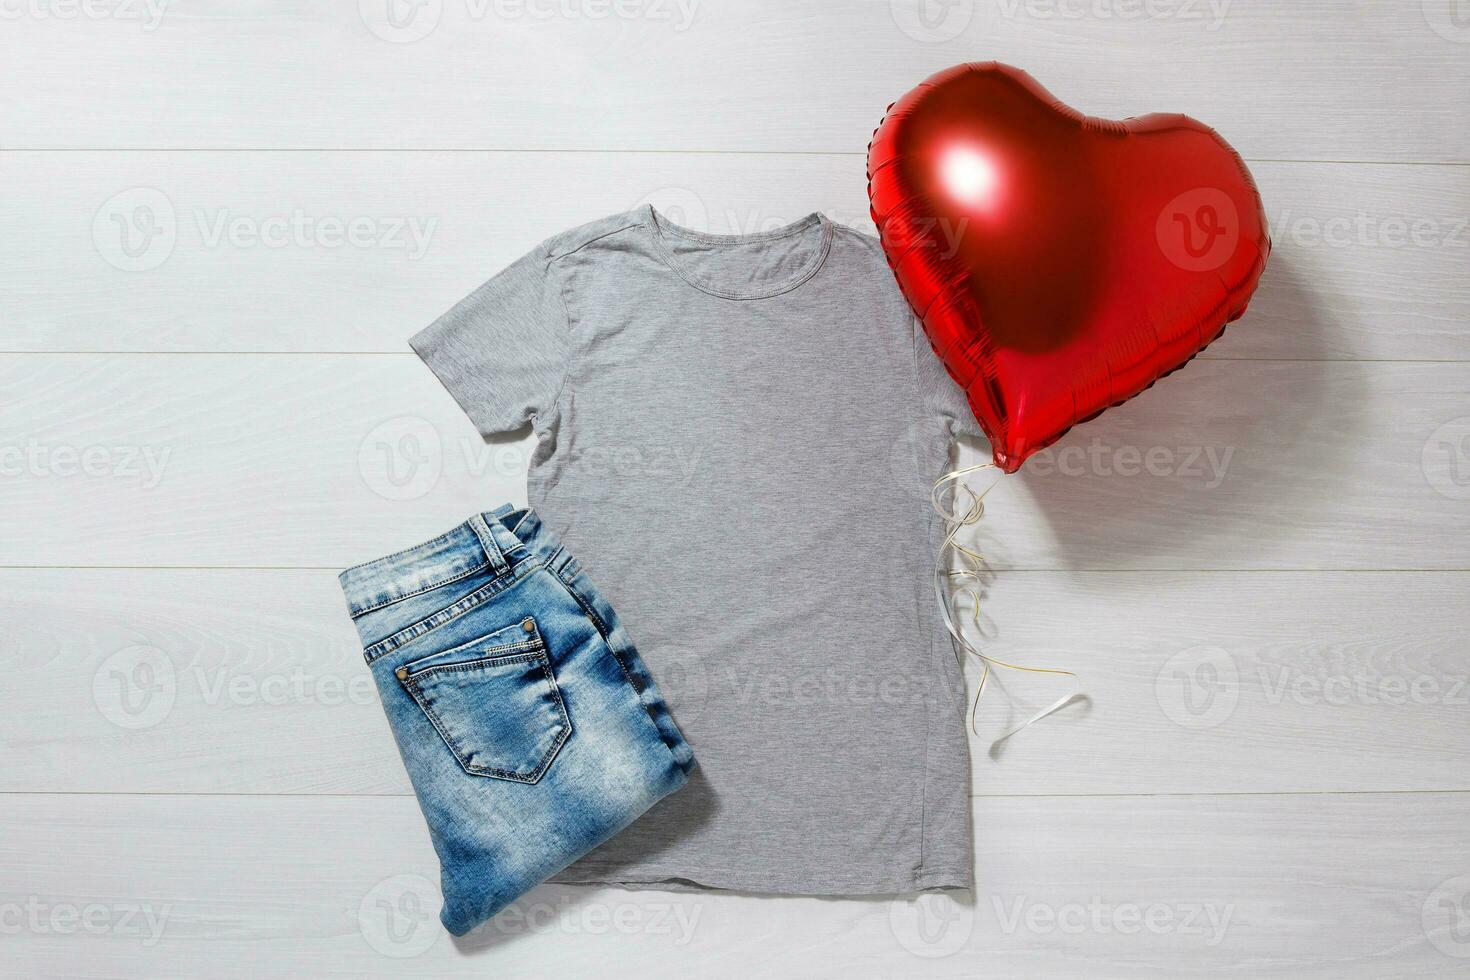 Grey tshirt mockup. Valentines Day concept shirt, balloon heart shape on wooden background. Copy space, template blank front view t-shirt clothes. Romantic outfit. Flat lay birthday holiday fashion photo